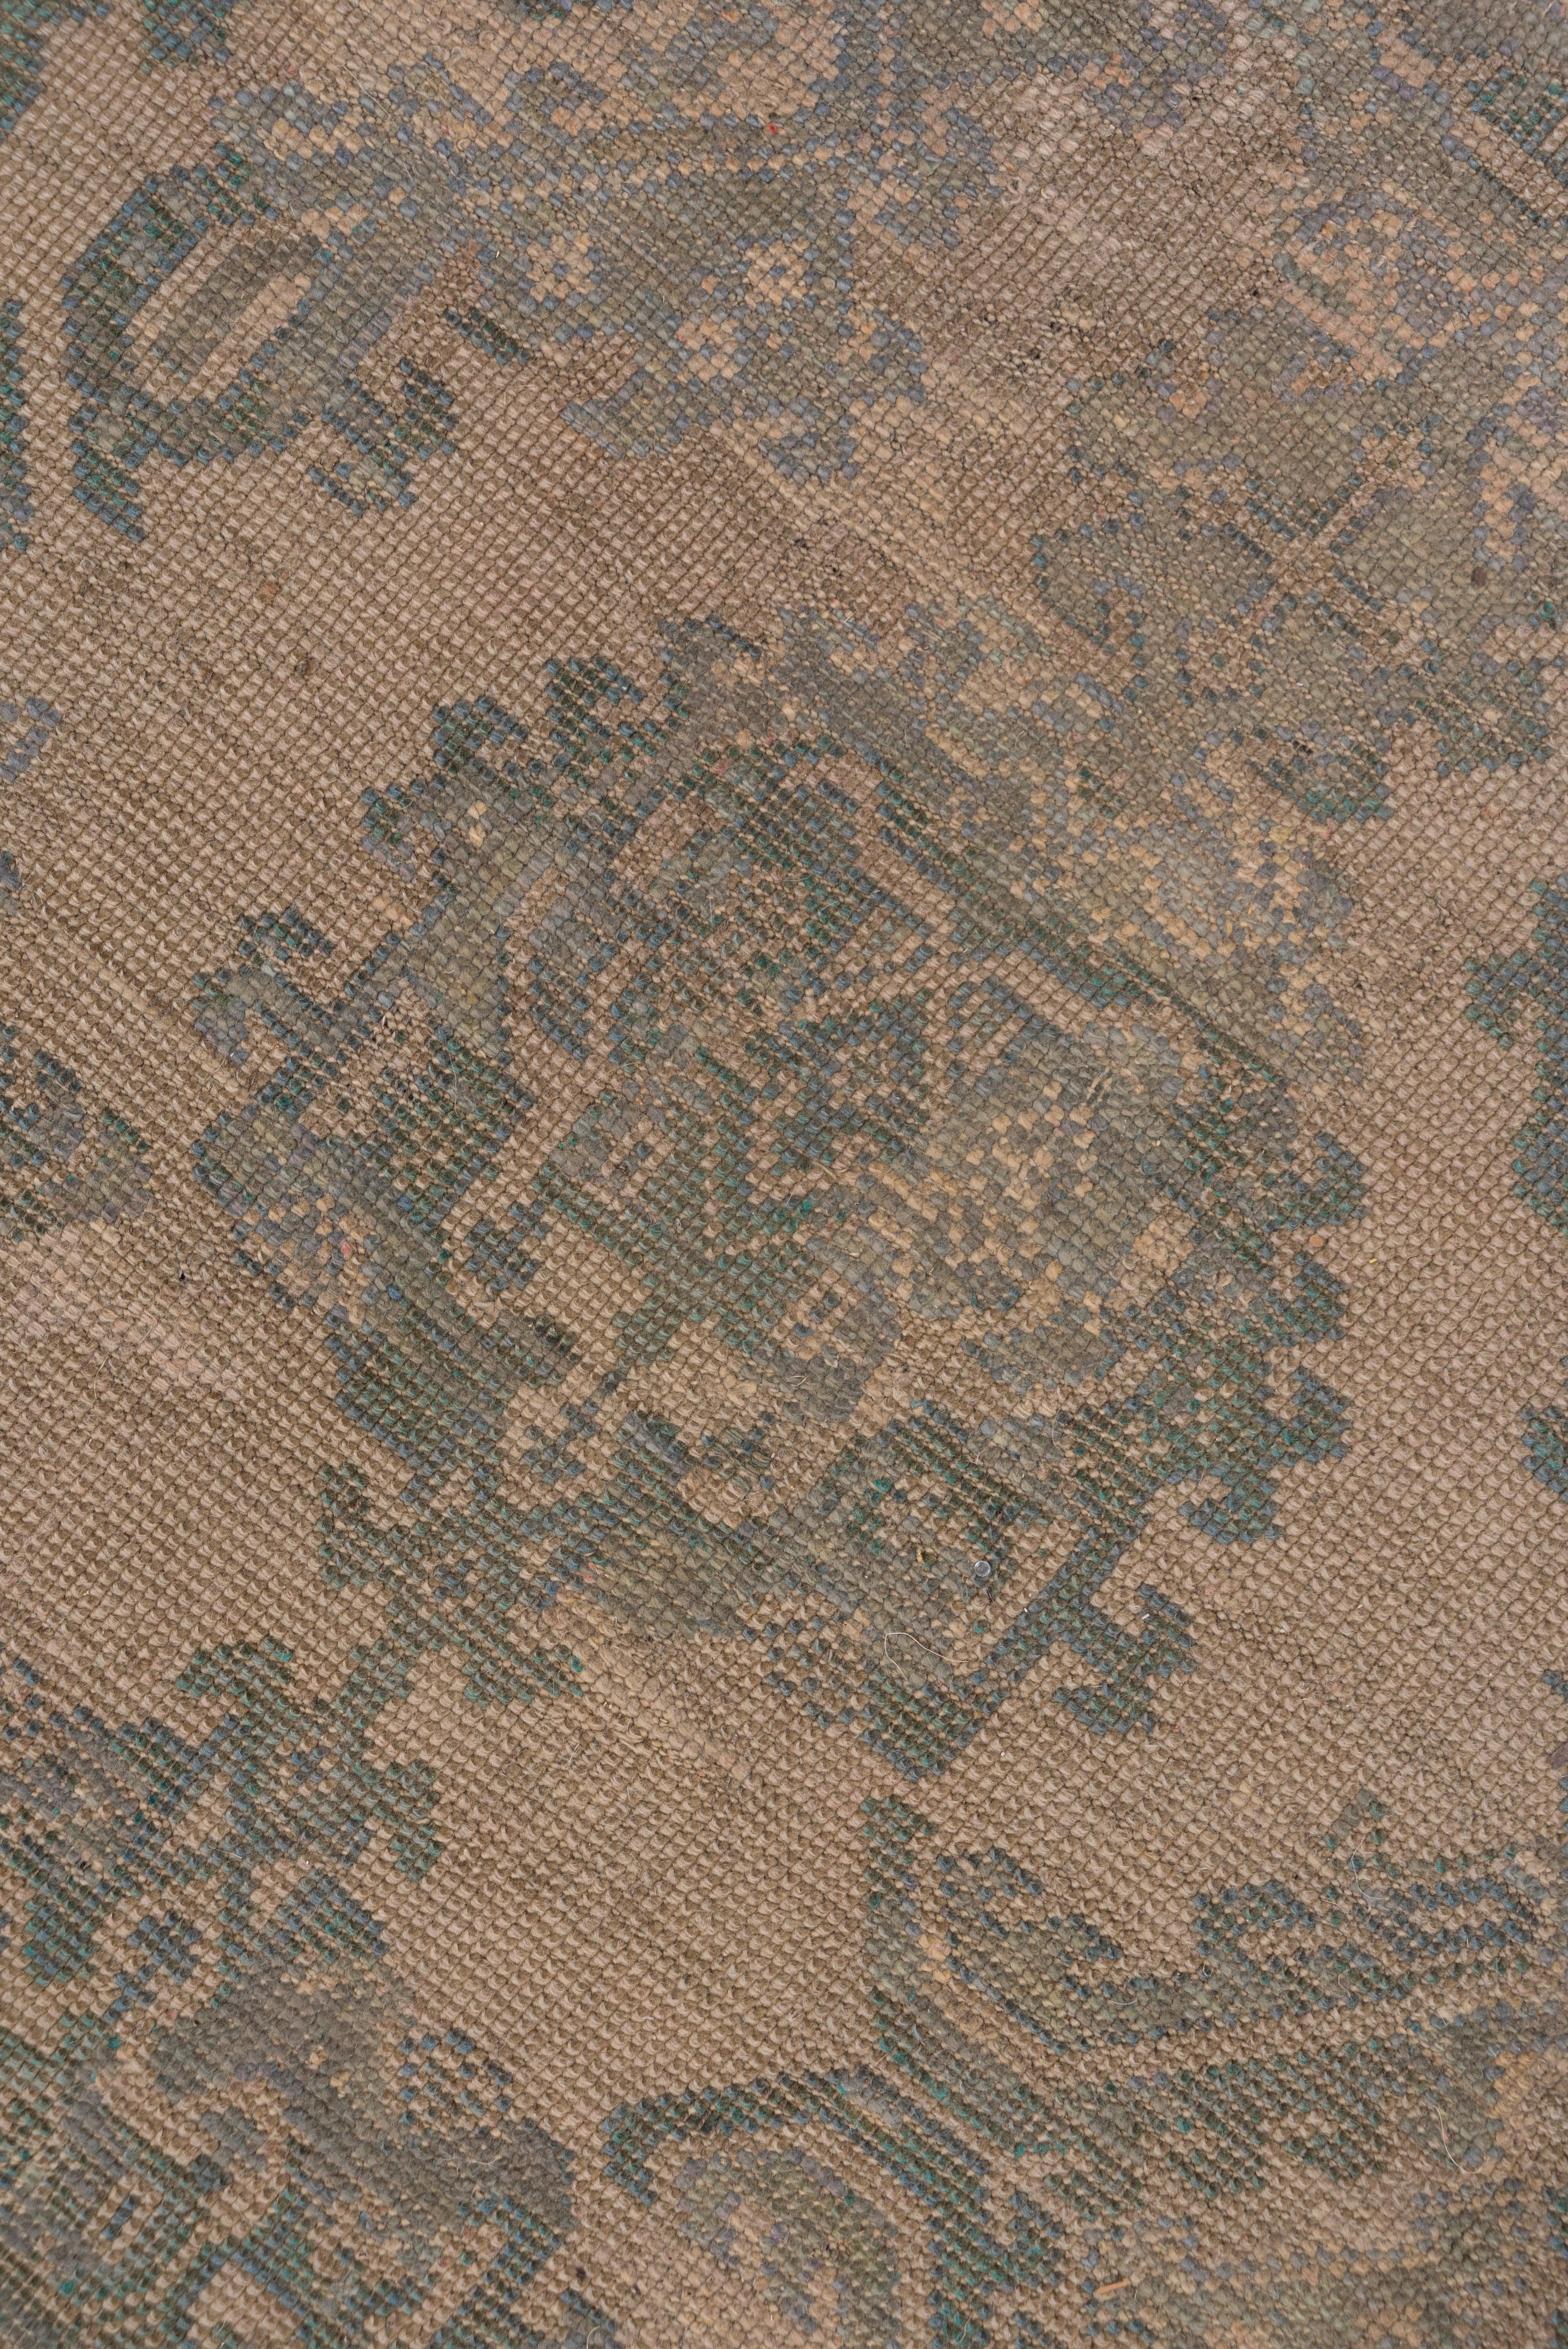 Wool Light Brown and Green Antique Oushak Carpet, circa 1920s For Sale